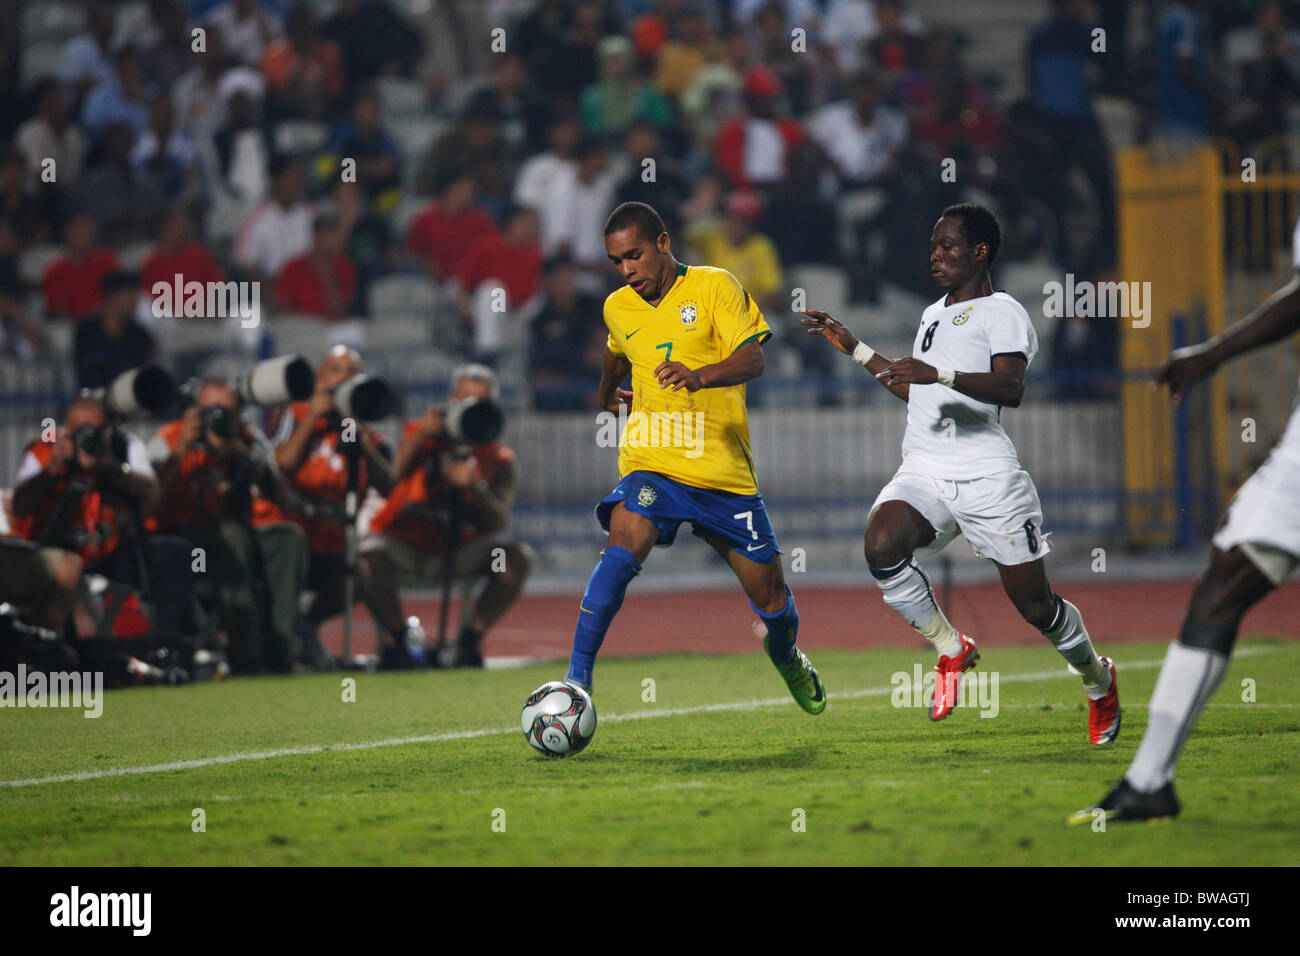 Alex Teixeira of Brazil (7) drives the ball against Ghana during the FIFA U-20 World Cup final October 16, 2009 Stock Photo